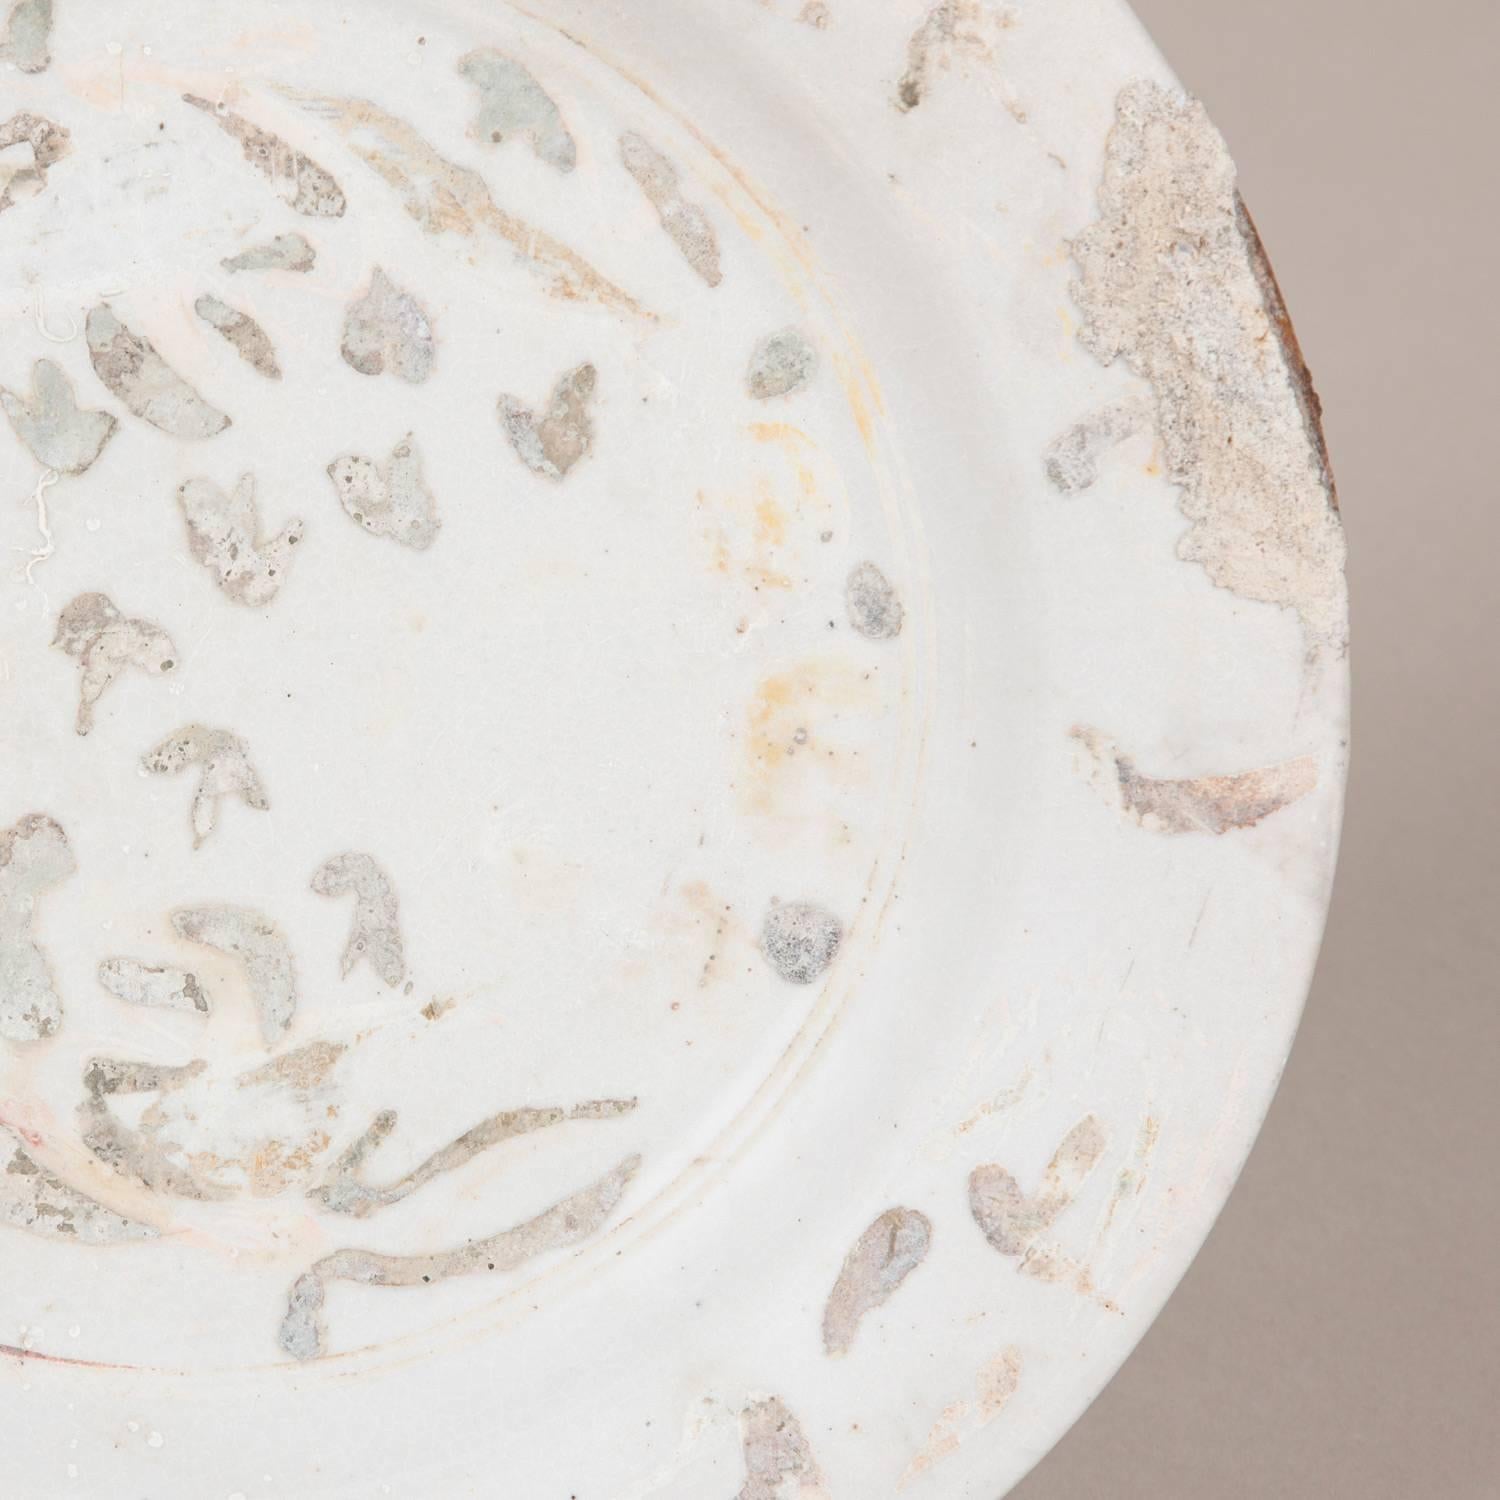 Chinese Set of Plates from the Shipwreck of the Binh Thuan For Sale